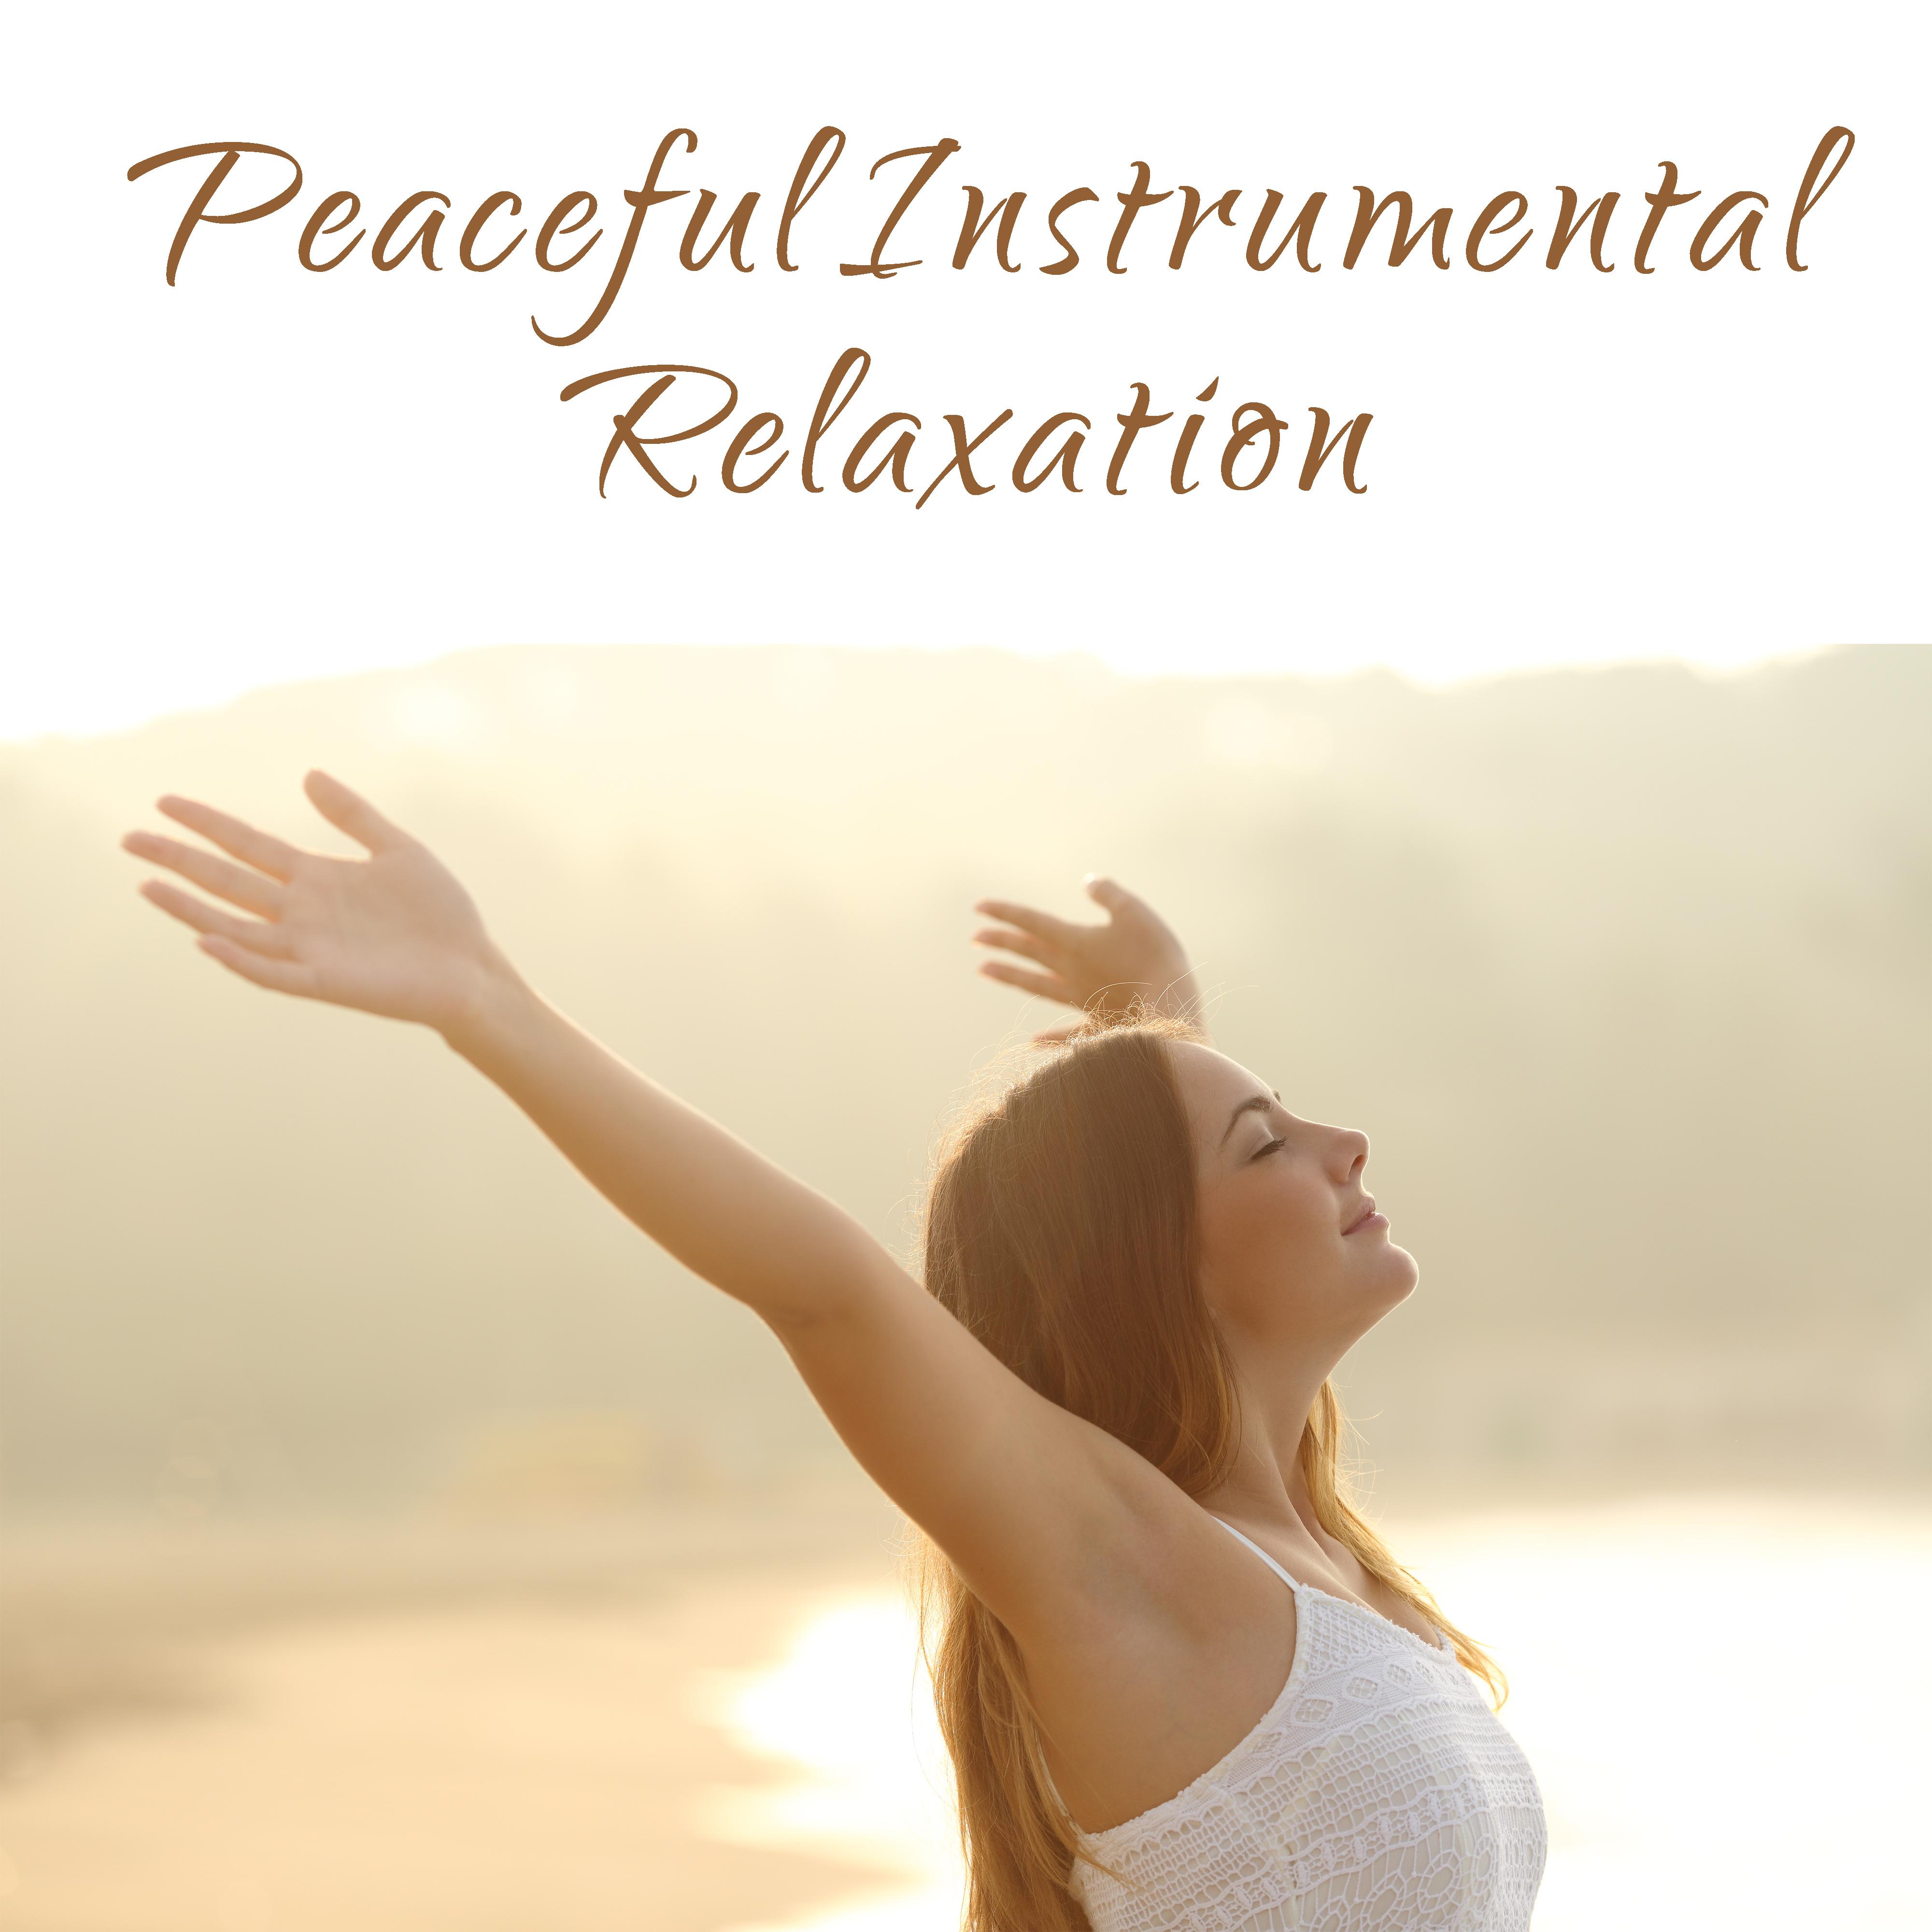 Peaceful Instrumental Relaxation